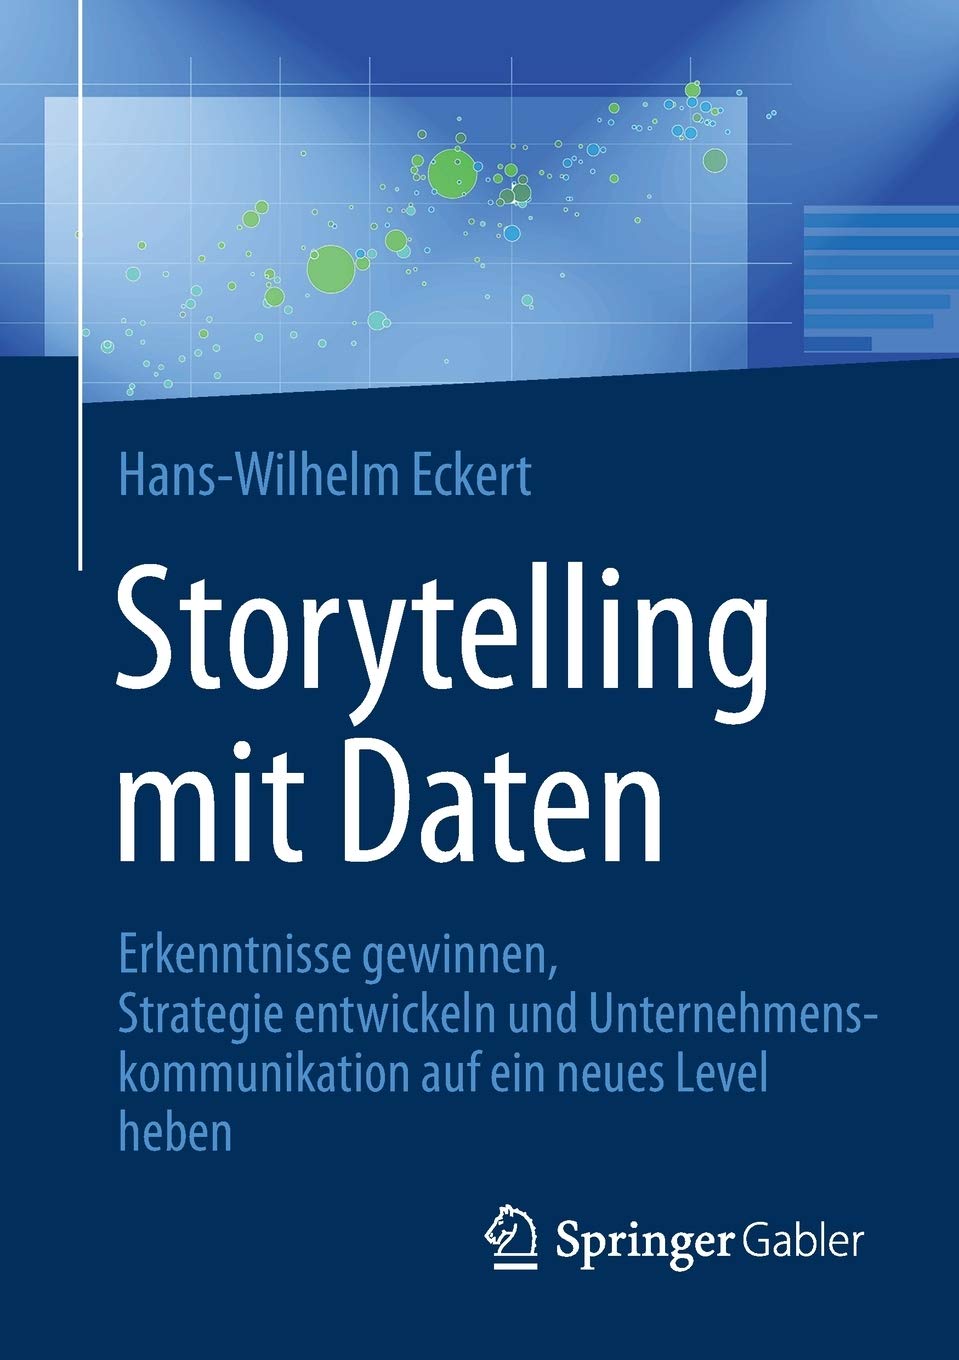 Storytelling with data